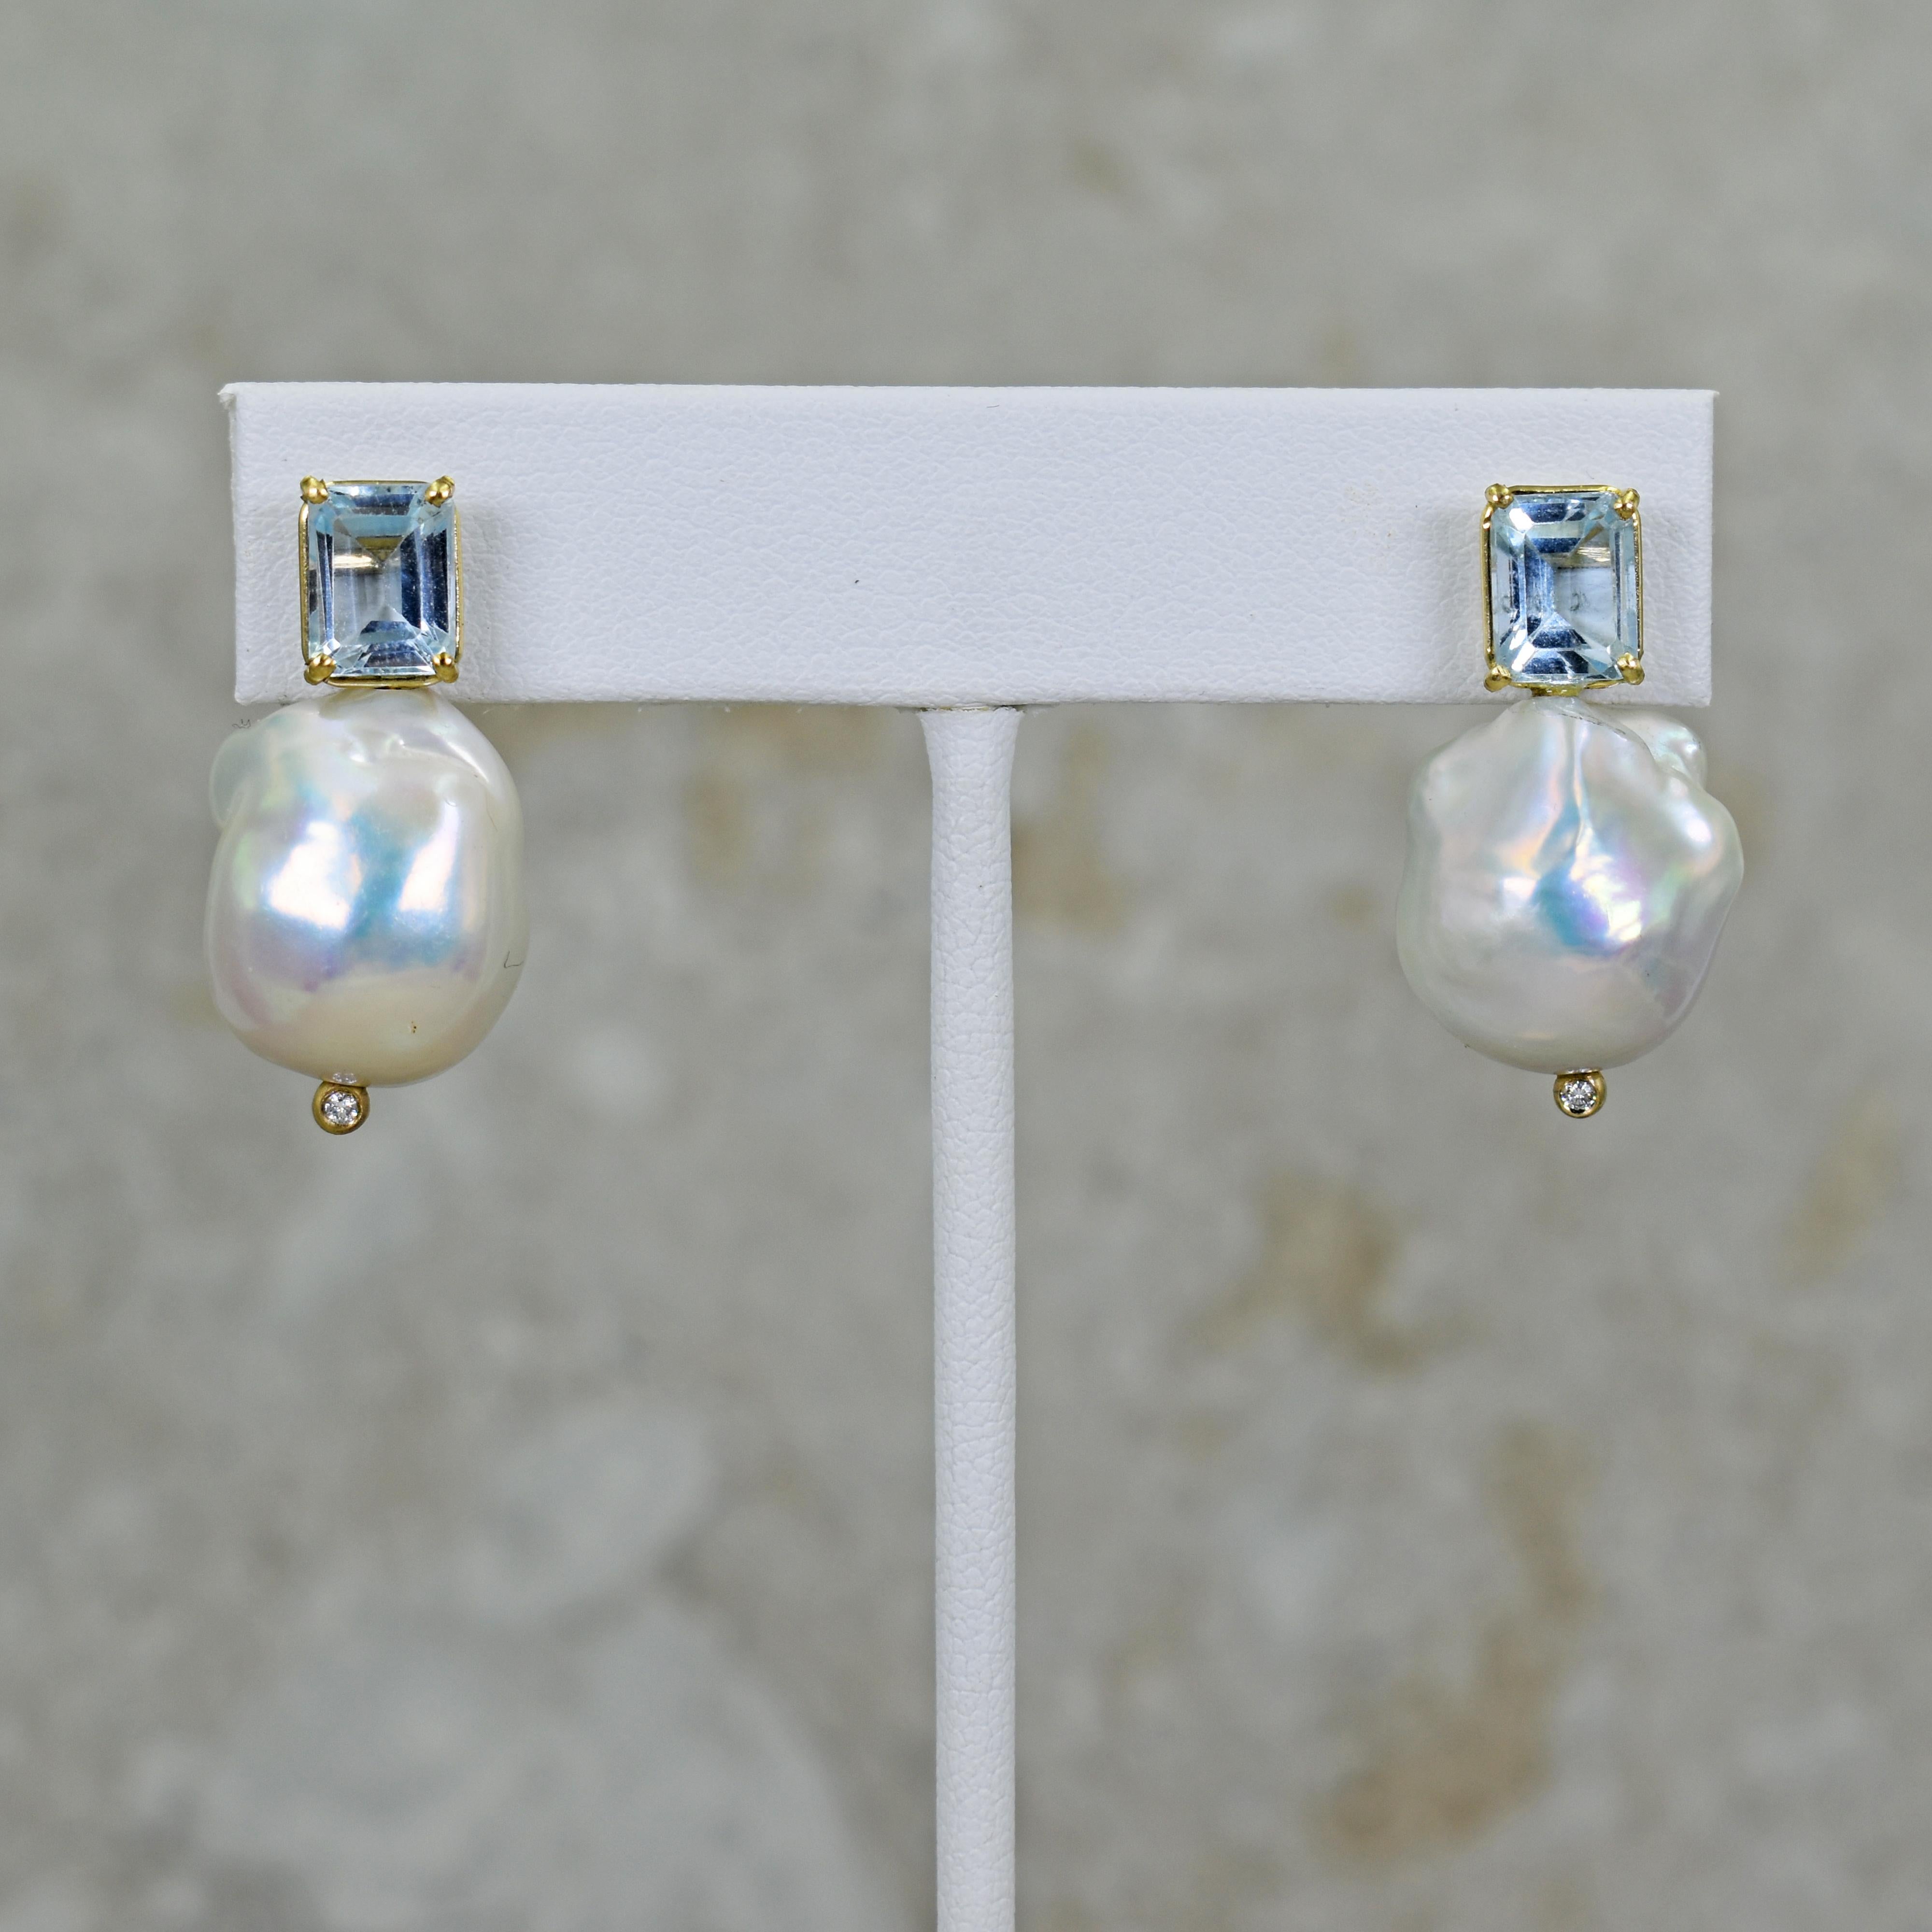 Gorgeous and unique 14k yellow gold stud earrings featuring two emerald-cut Aquamarine gemstones, totaling 3.12 carats, with Freshwater Baroque Pearls and accent white diamonds. Stud earrings are 1.13 inches or 29 mm in length. These artisan drop